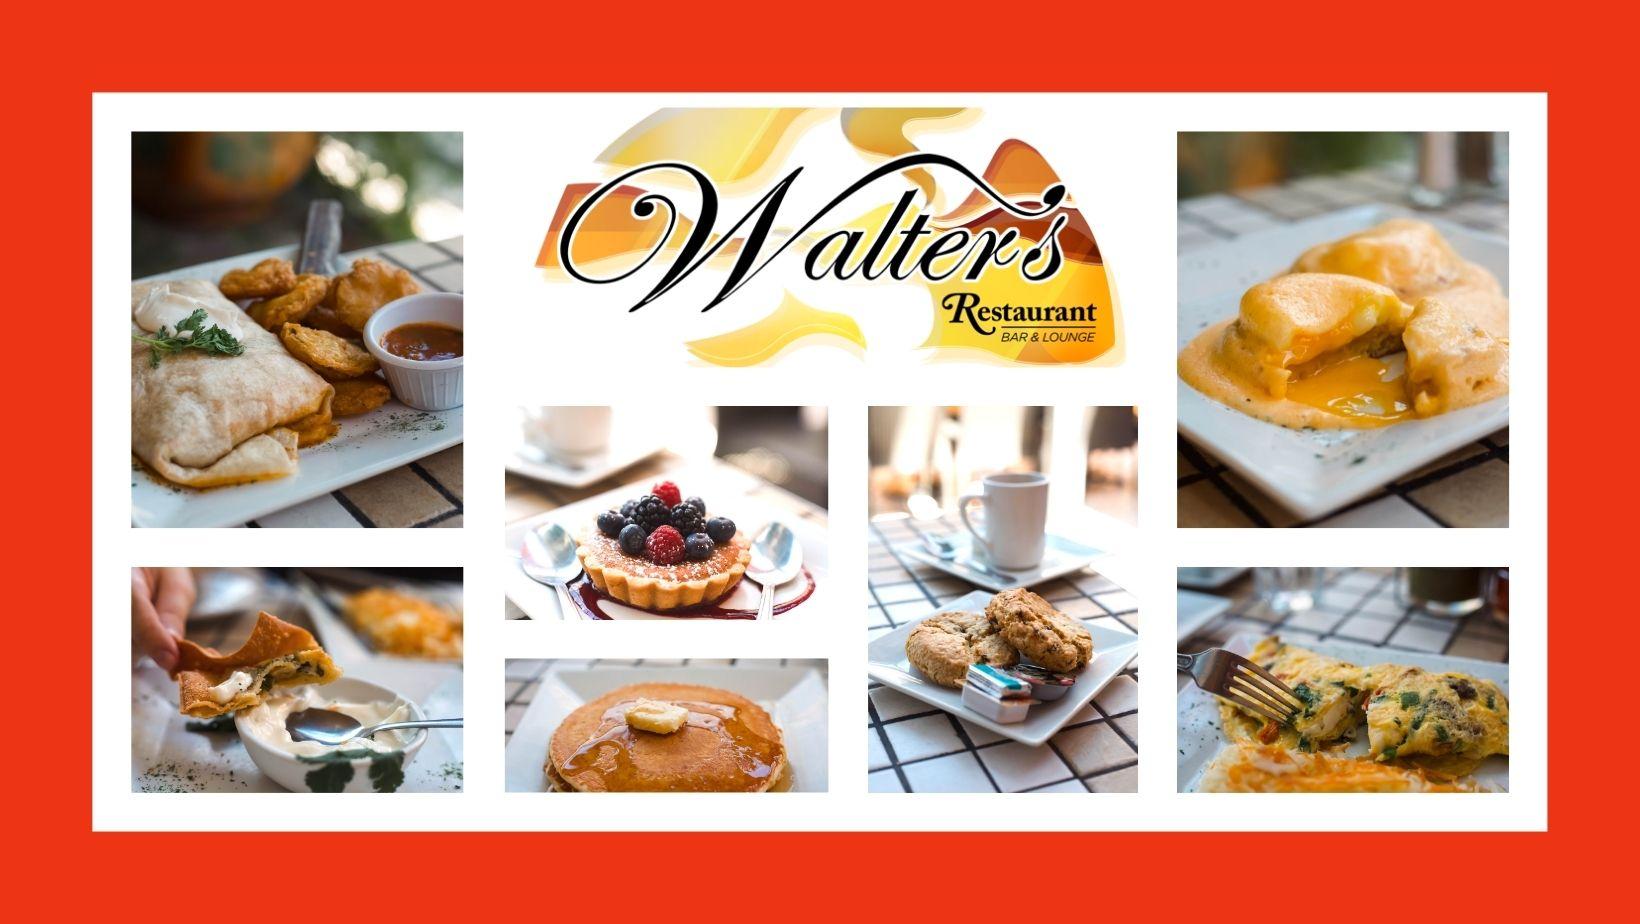 Collage of menu items from Walter's restaurant, including brunch items.

